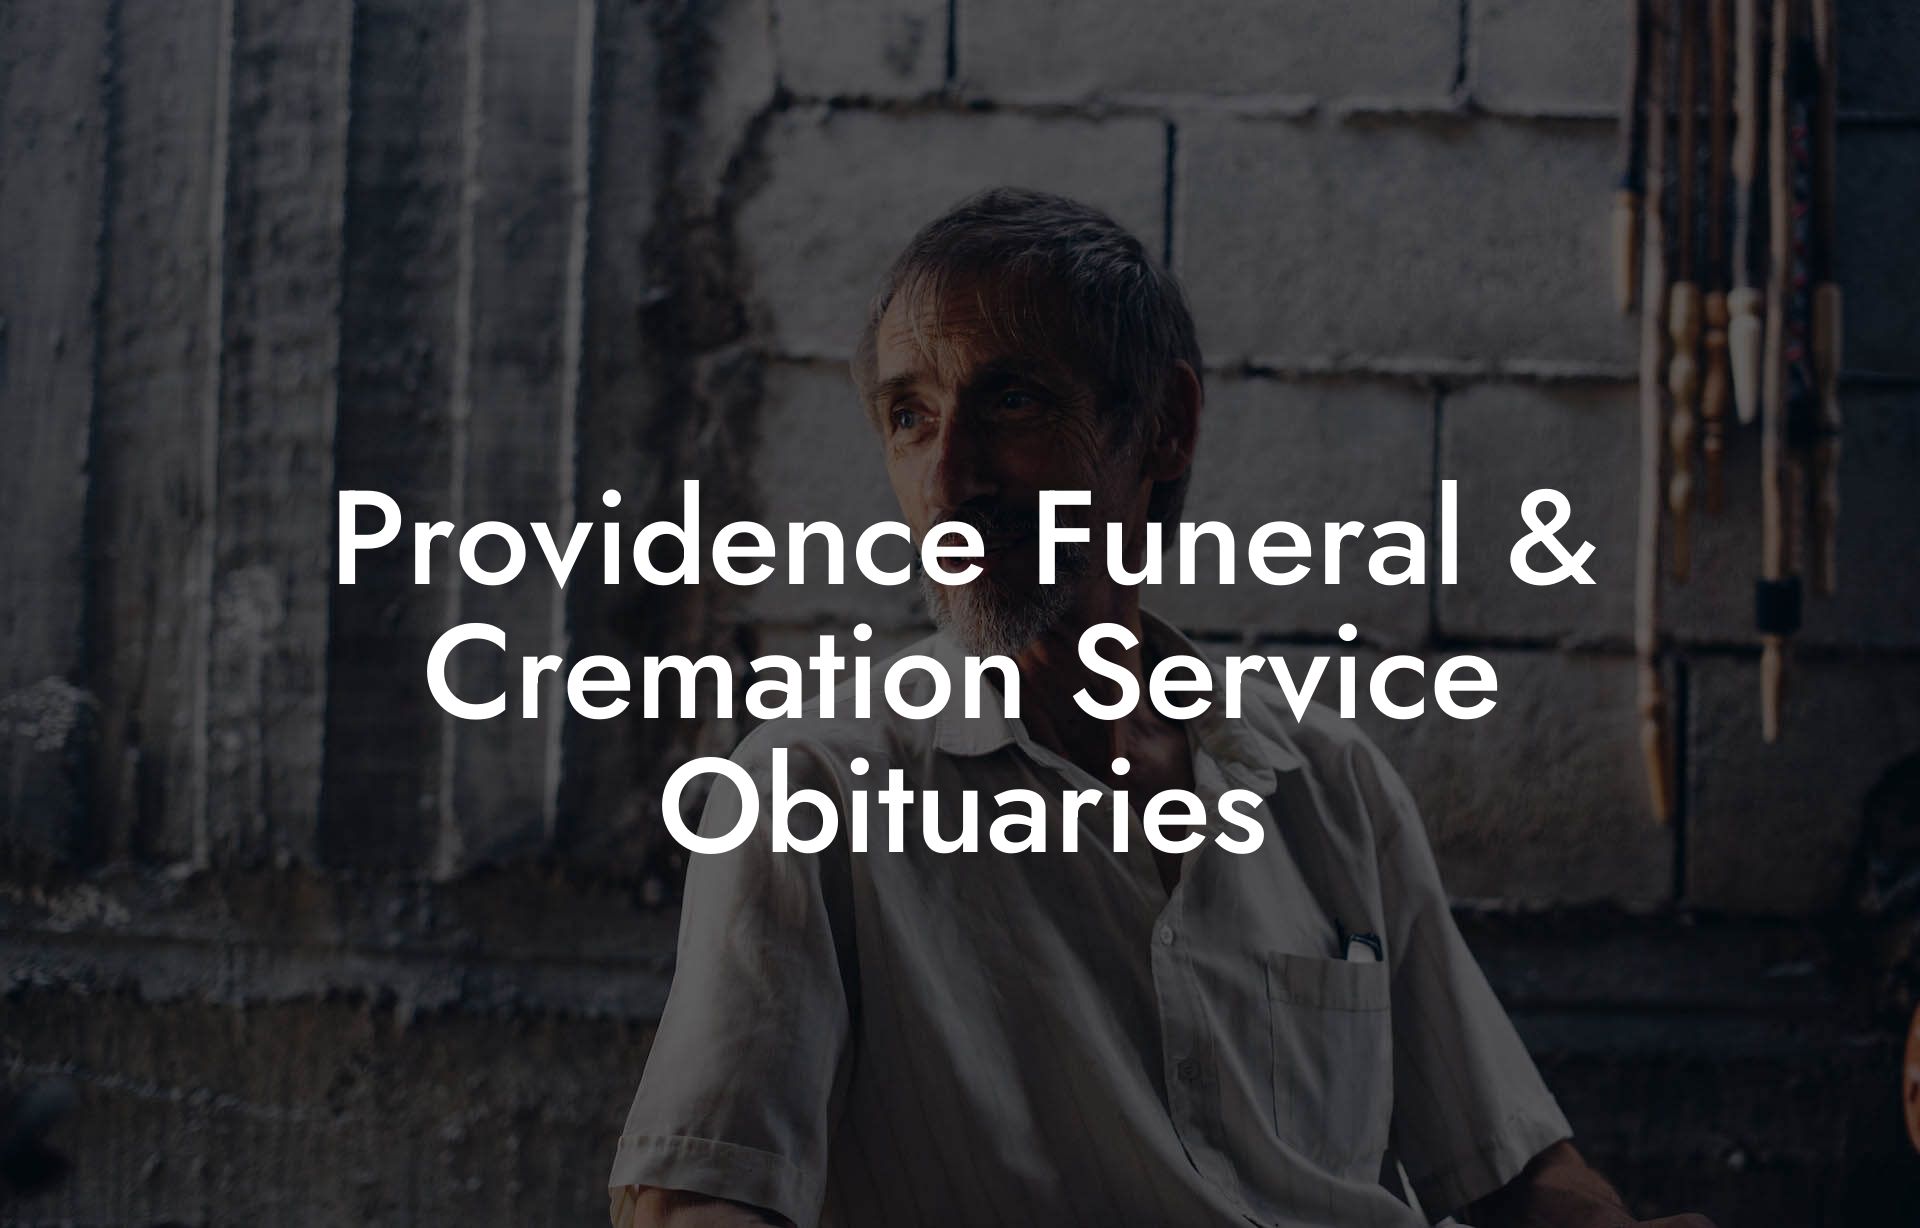 Providence Funeral & Cremation Service Obituaries